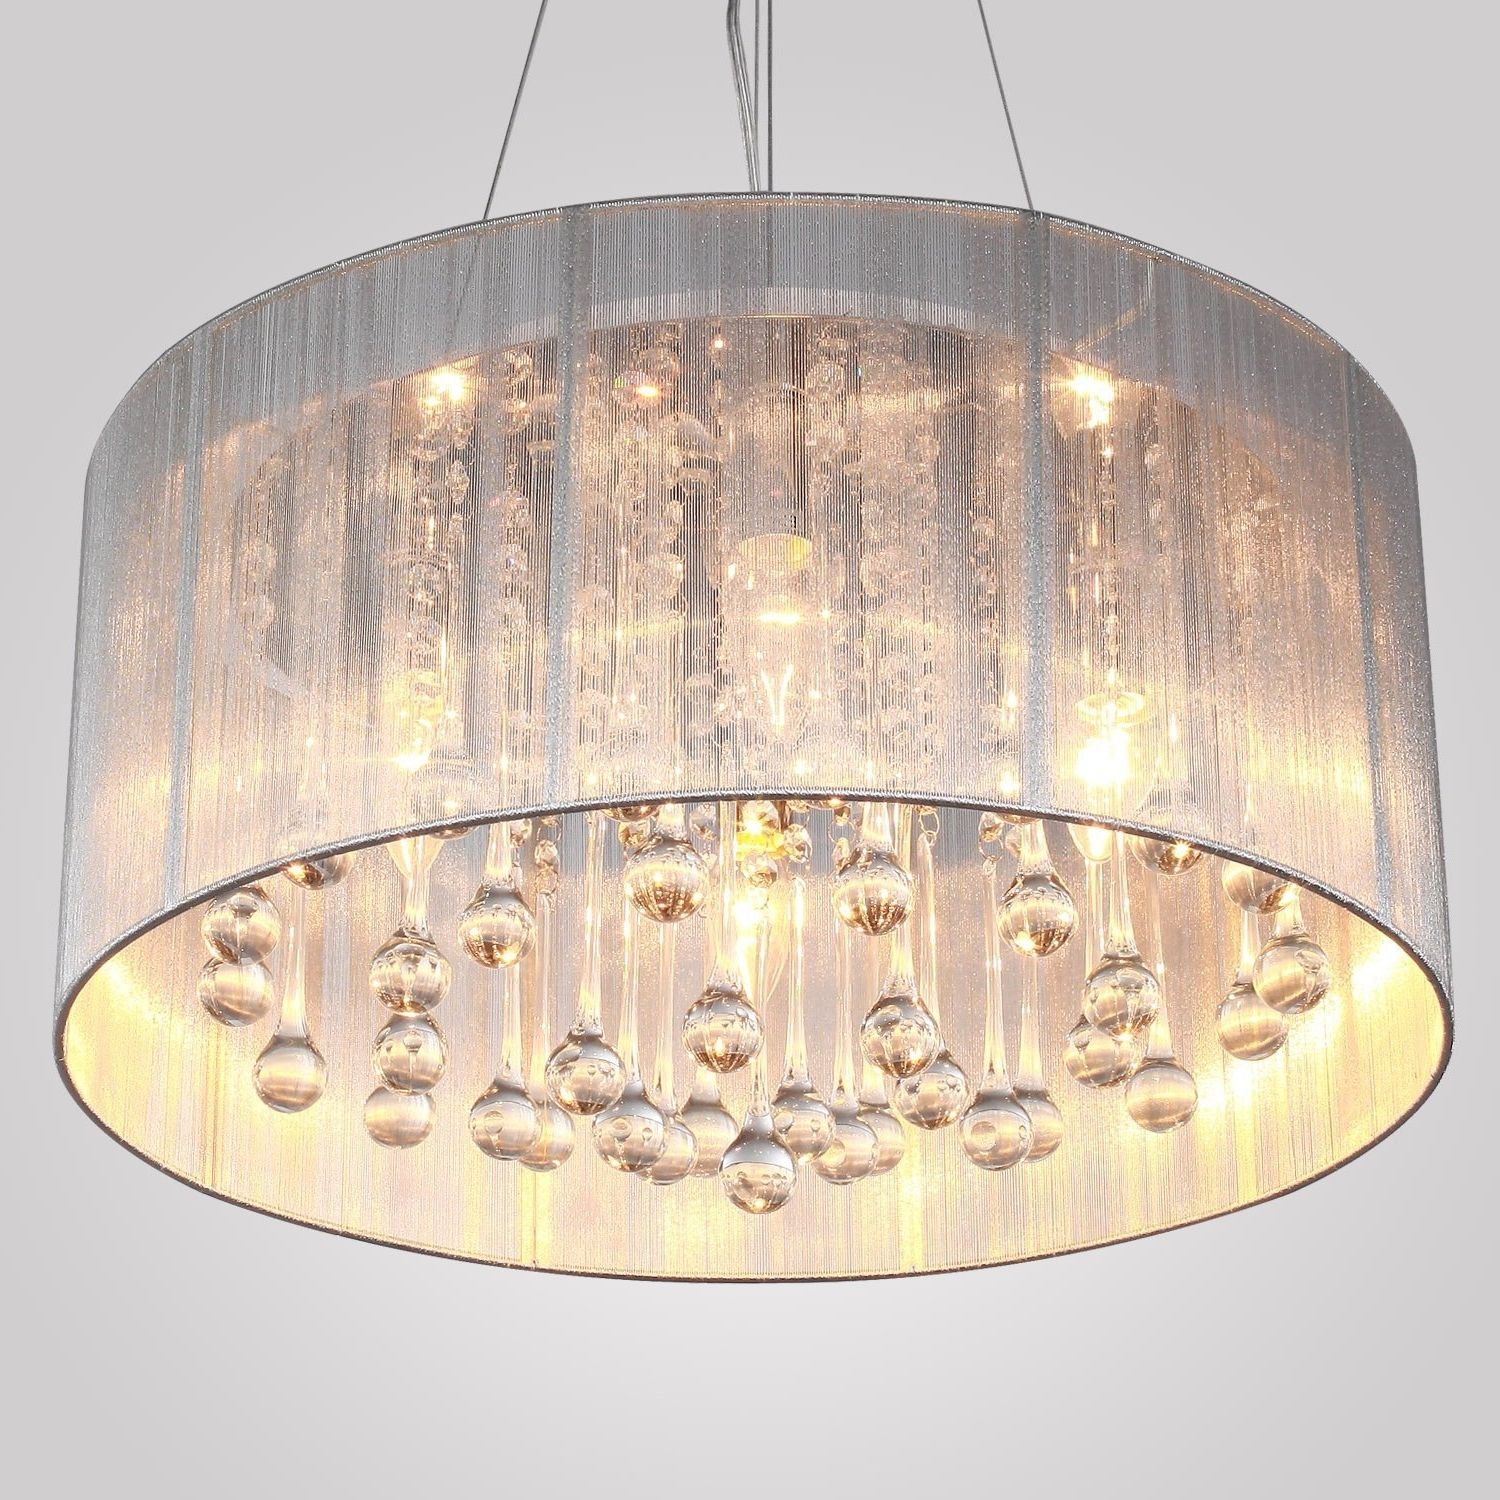 Light Fixture : Drum Pendant Lighting Lowes Rectangular Flush Mount Throughout 2017 Extra Large Chandelier Lighting (View 8 of 15)